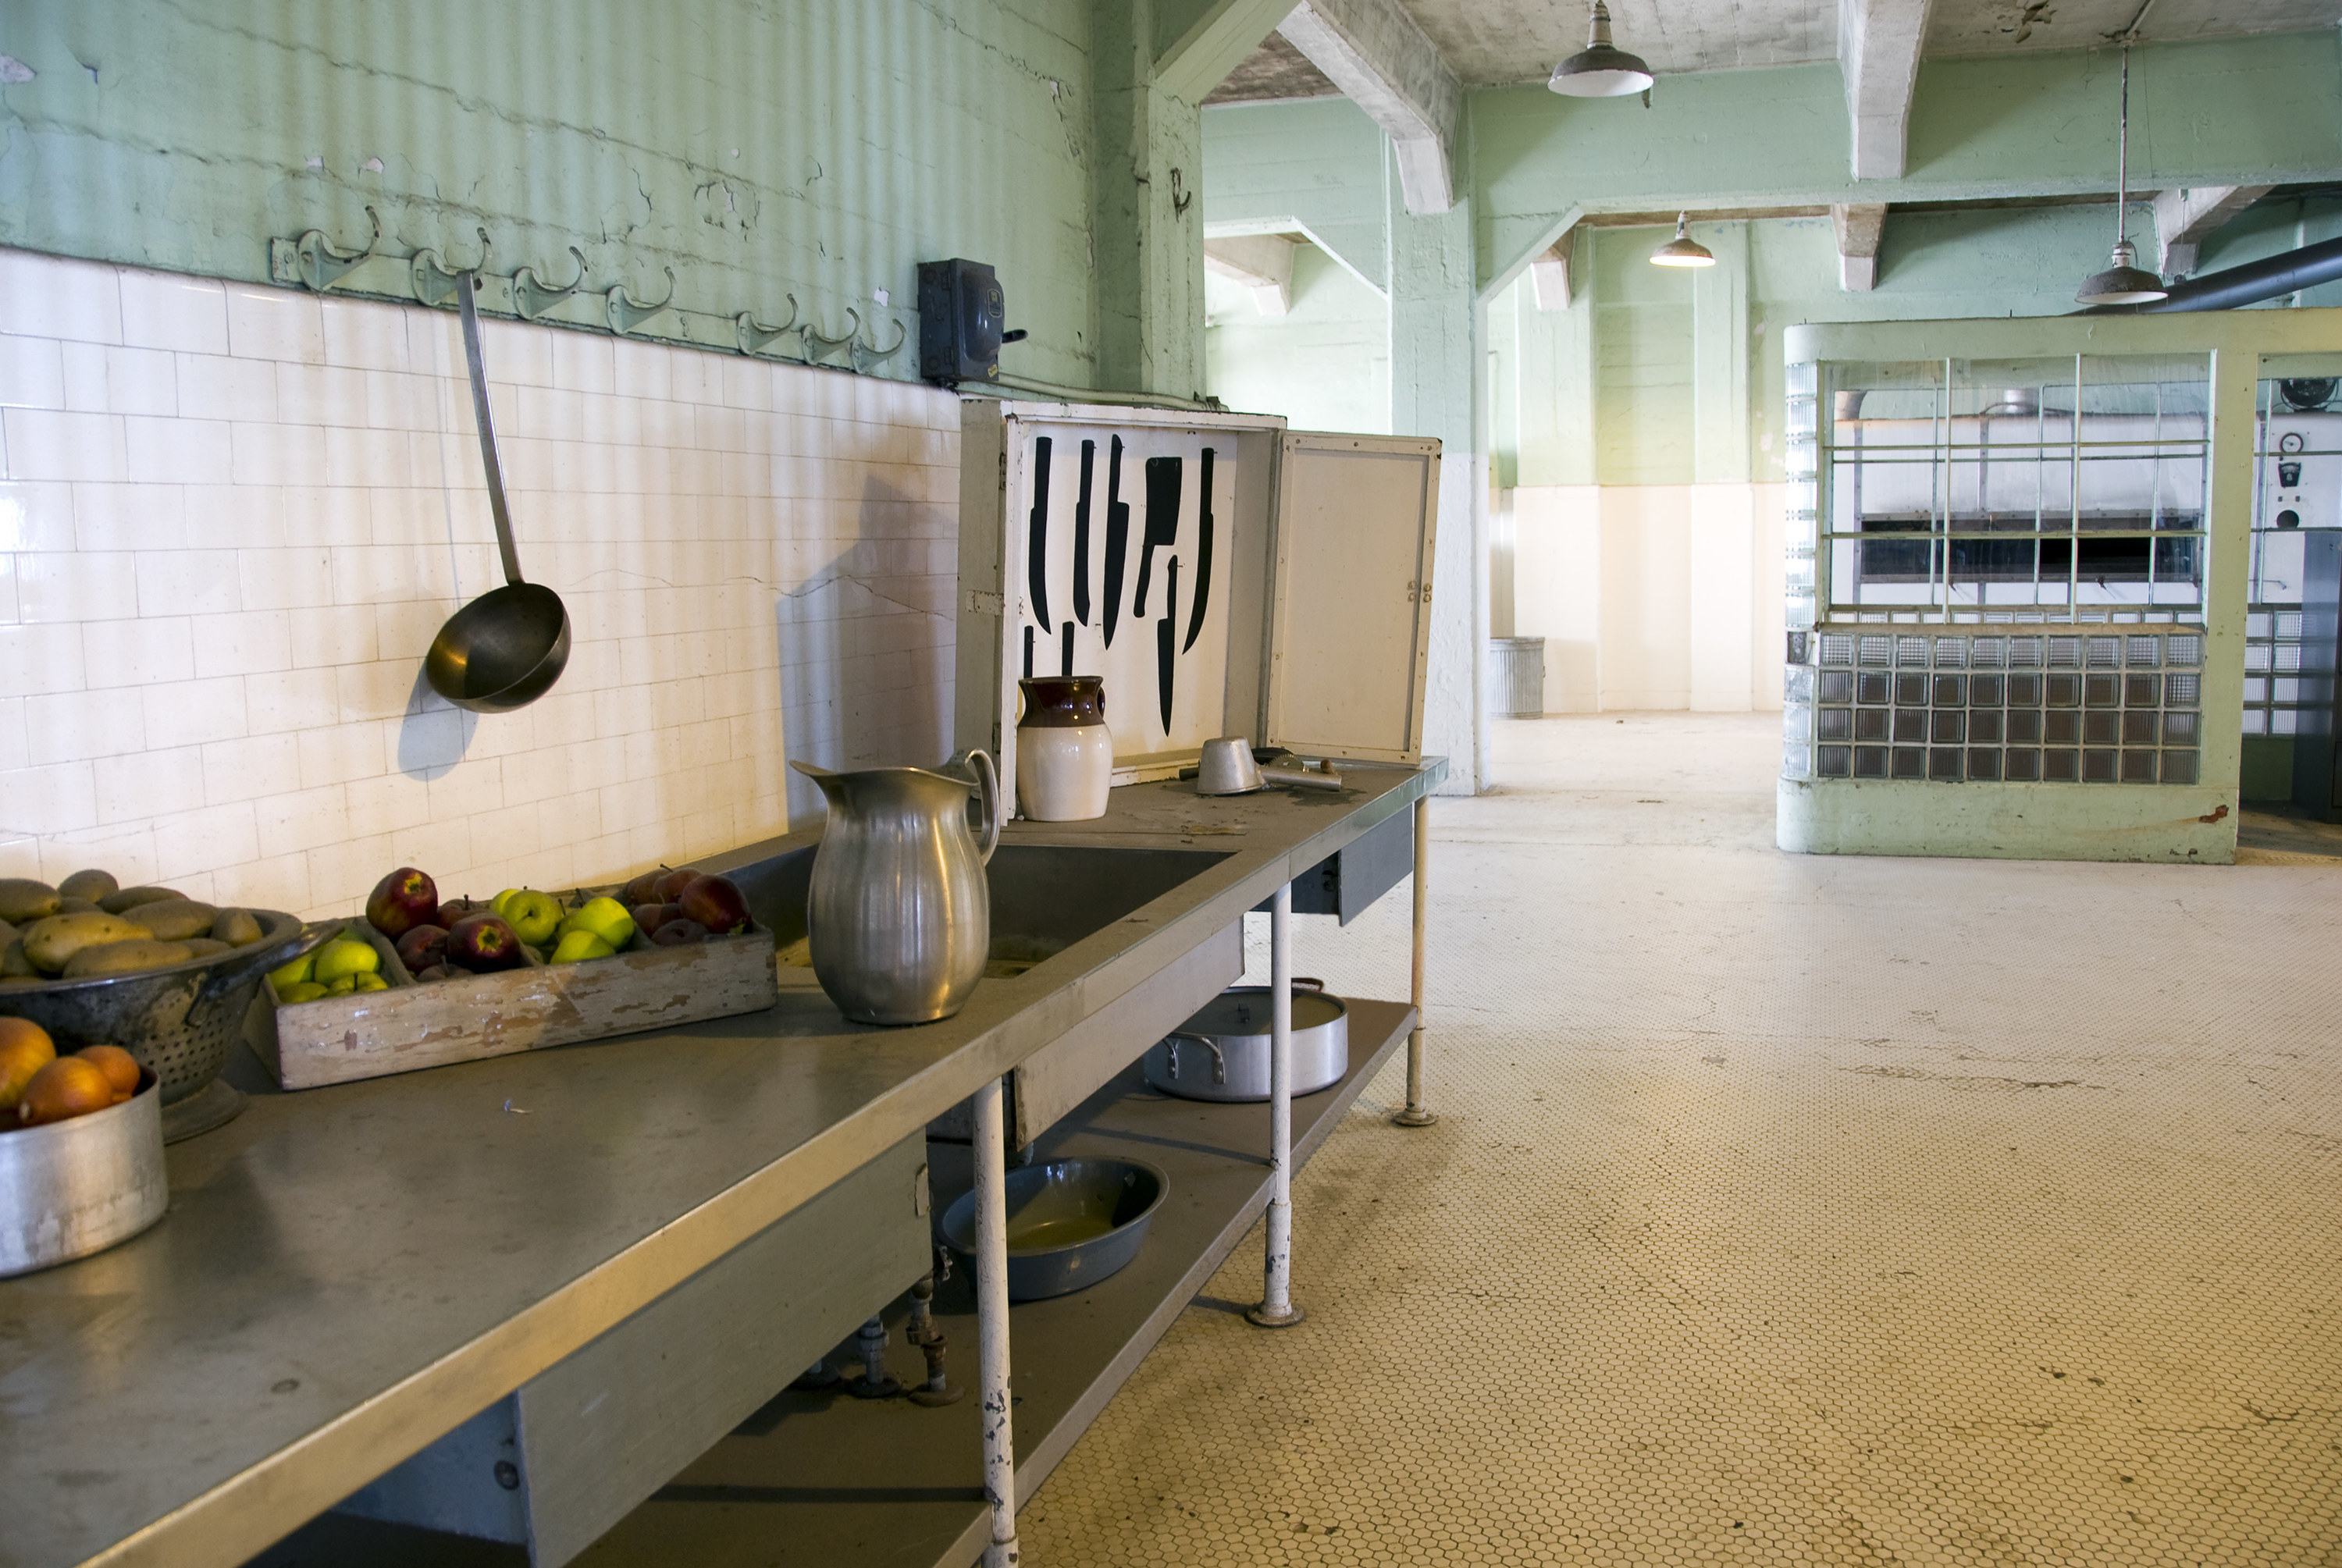 The kitchen of a prison